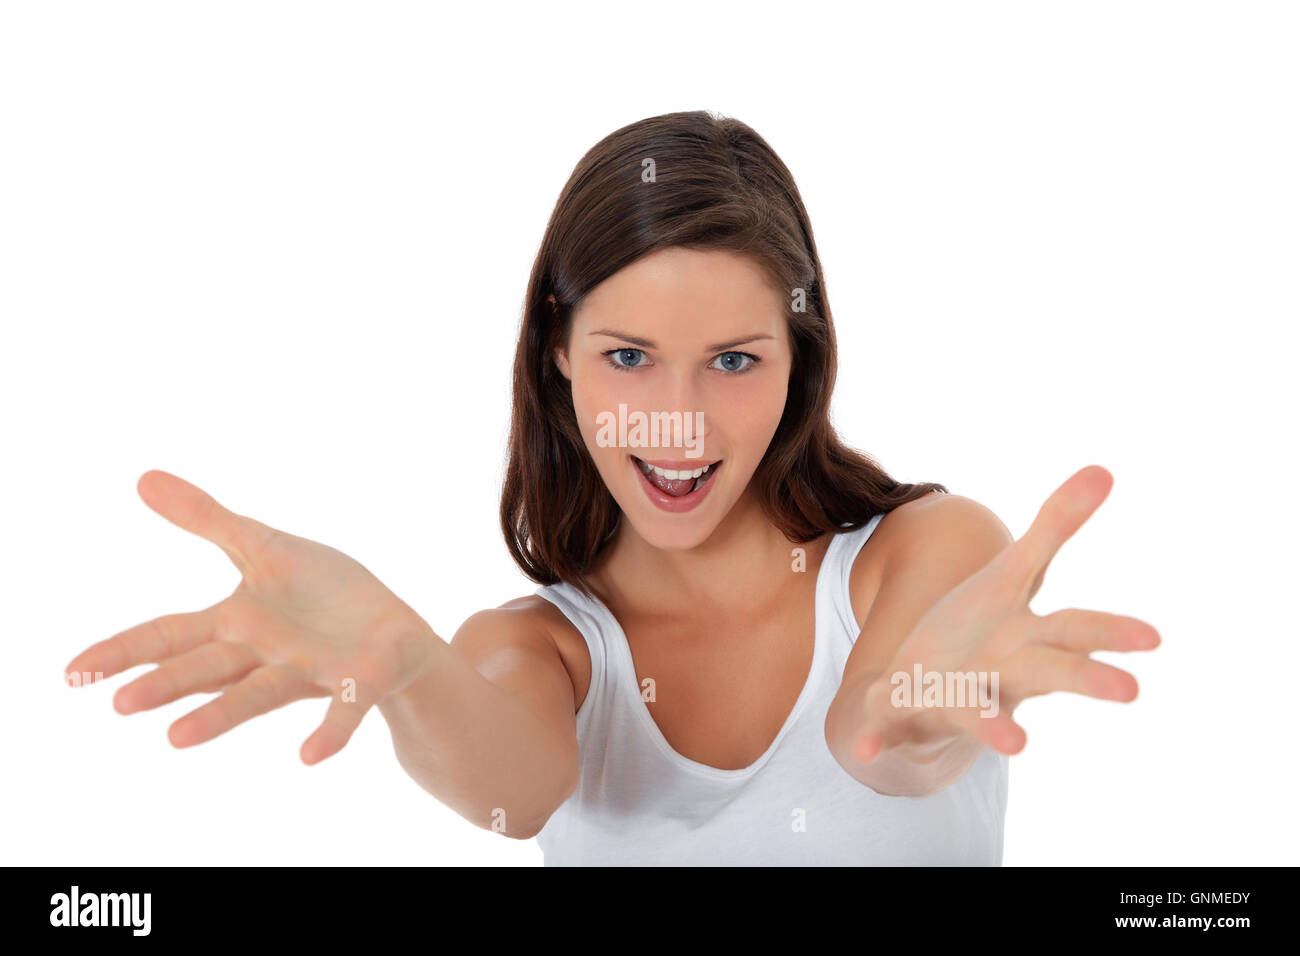 woman with welcoming gesture Stock Photo